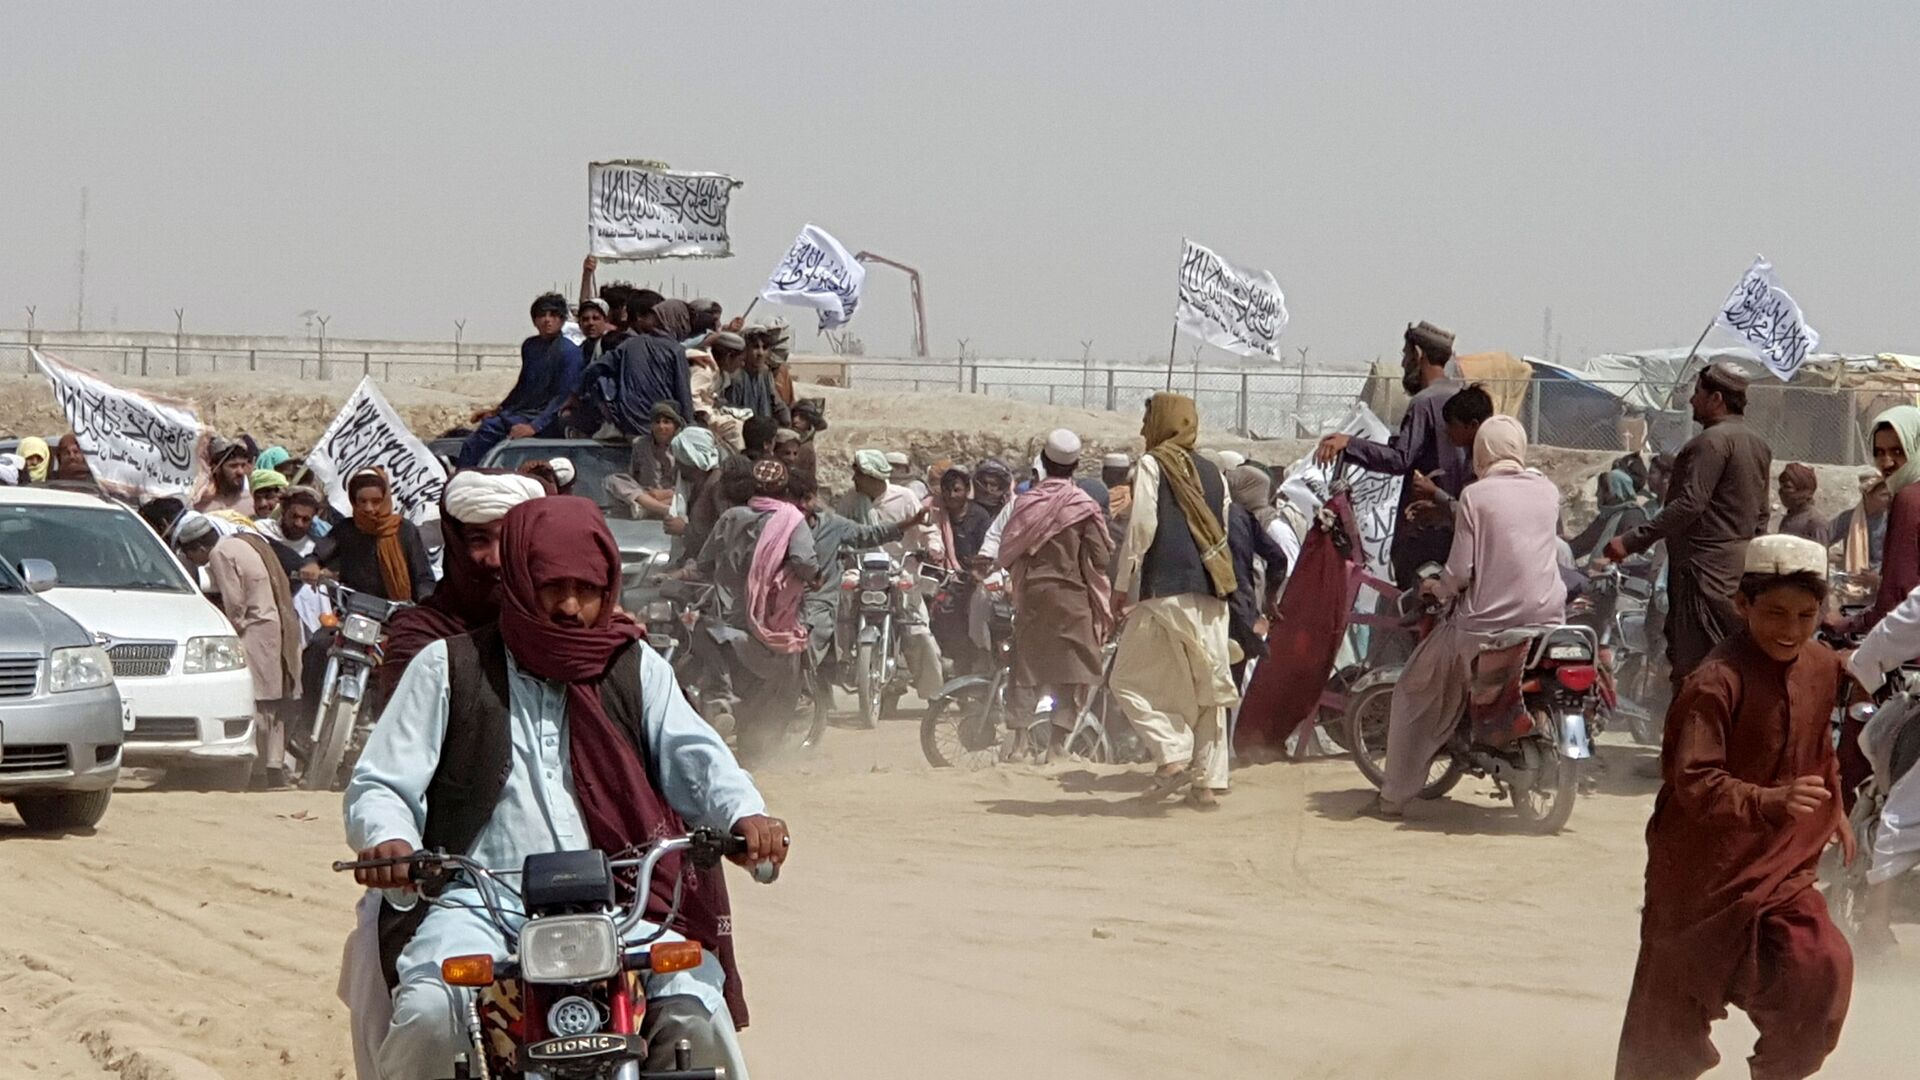 People on vehicles, holding Taliban flags, gather near the Friendship Gate crossing point in the Pakistan-Afghanistan border town of Chaman, Pakistan July 14, 2021 - Sputnik International, 1920, 23.07.2021